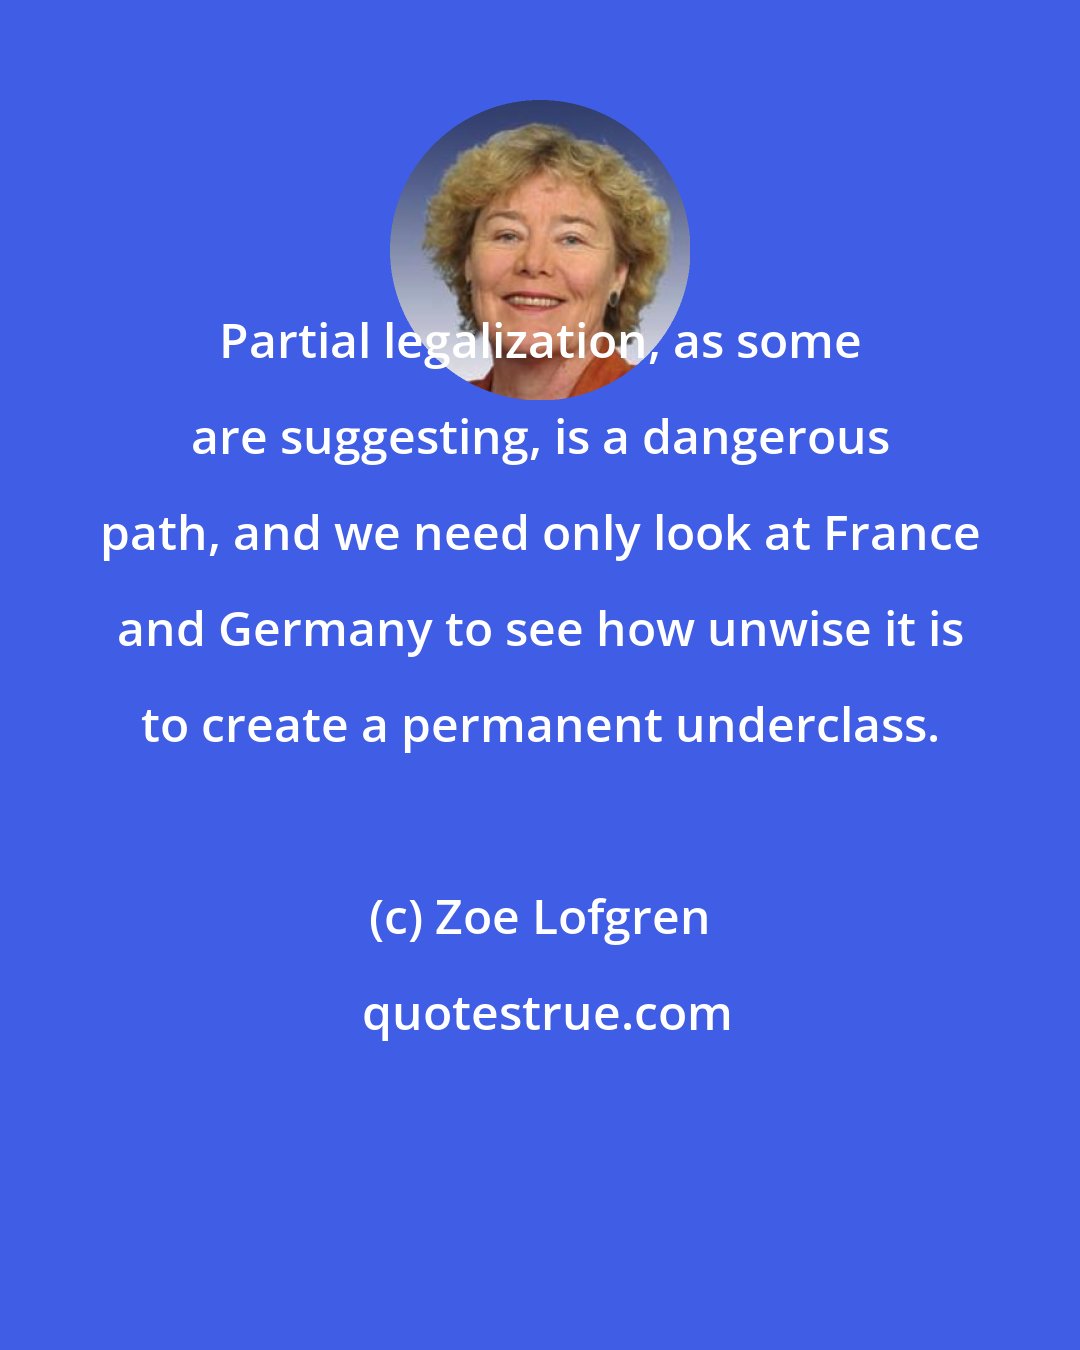 Zoe Lofgren: Partial legalization, as some are suggesting, is a dangerous path, and we need only look at France and Germany to see how unwise it is to create a permanent underclass.